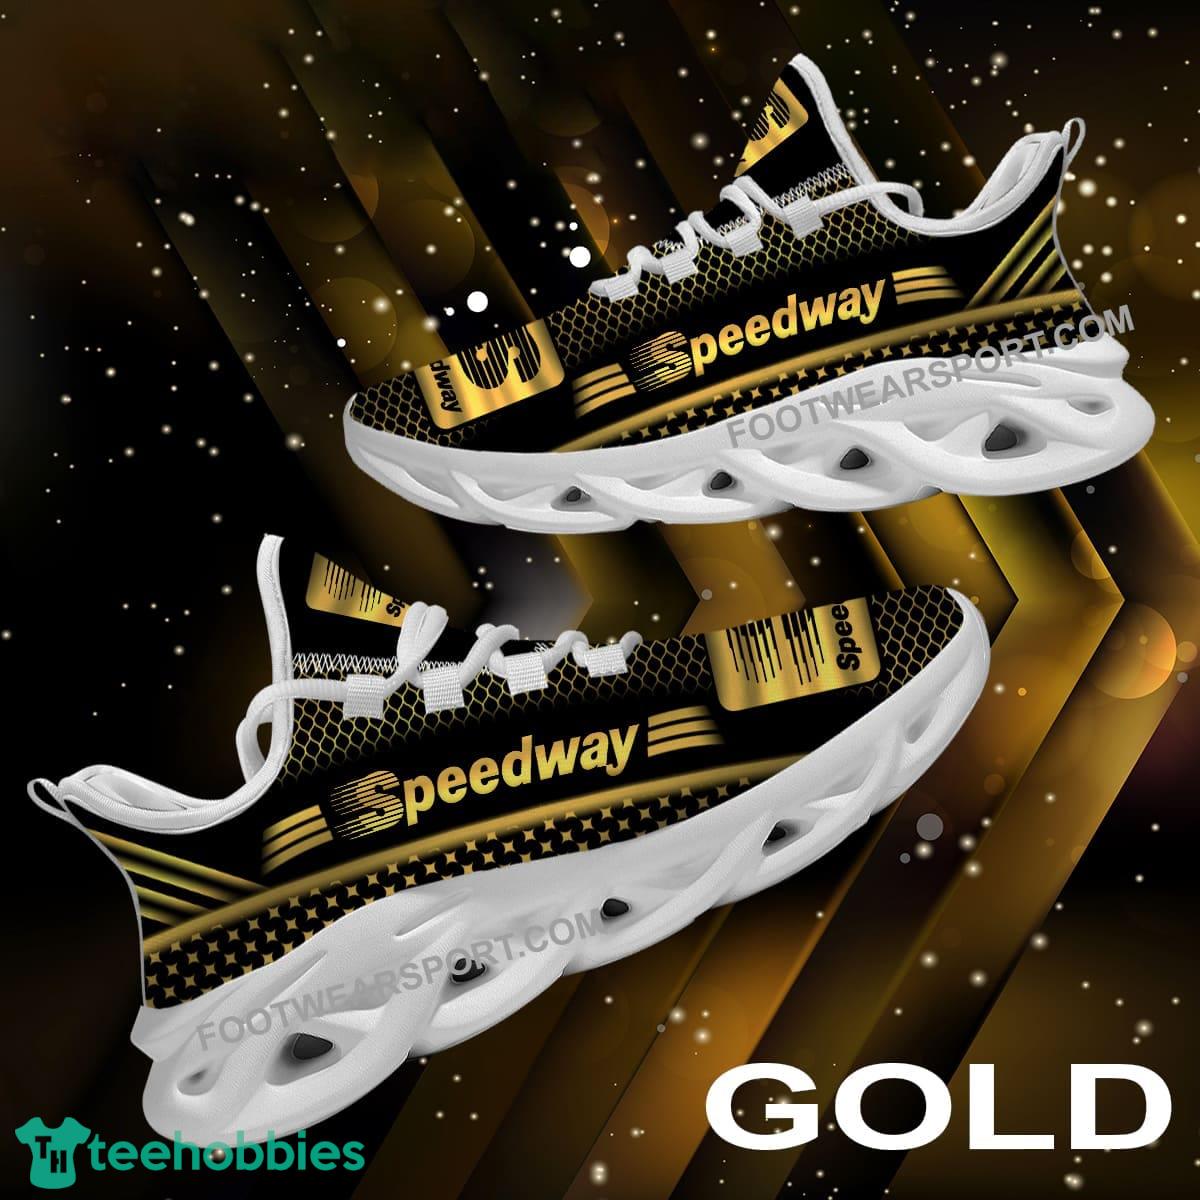 Speedway Max Soul Shoes Gold Running Sneaker Luxury For Fans Gift - Speedway Max Soul Shoes Gold Running Sneaker Luxury For Fans Gift